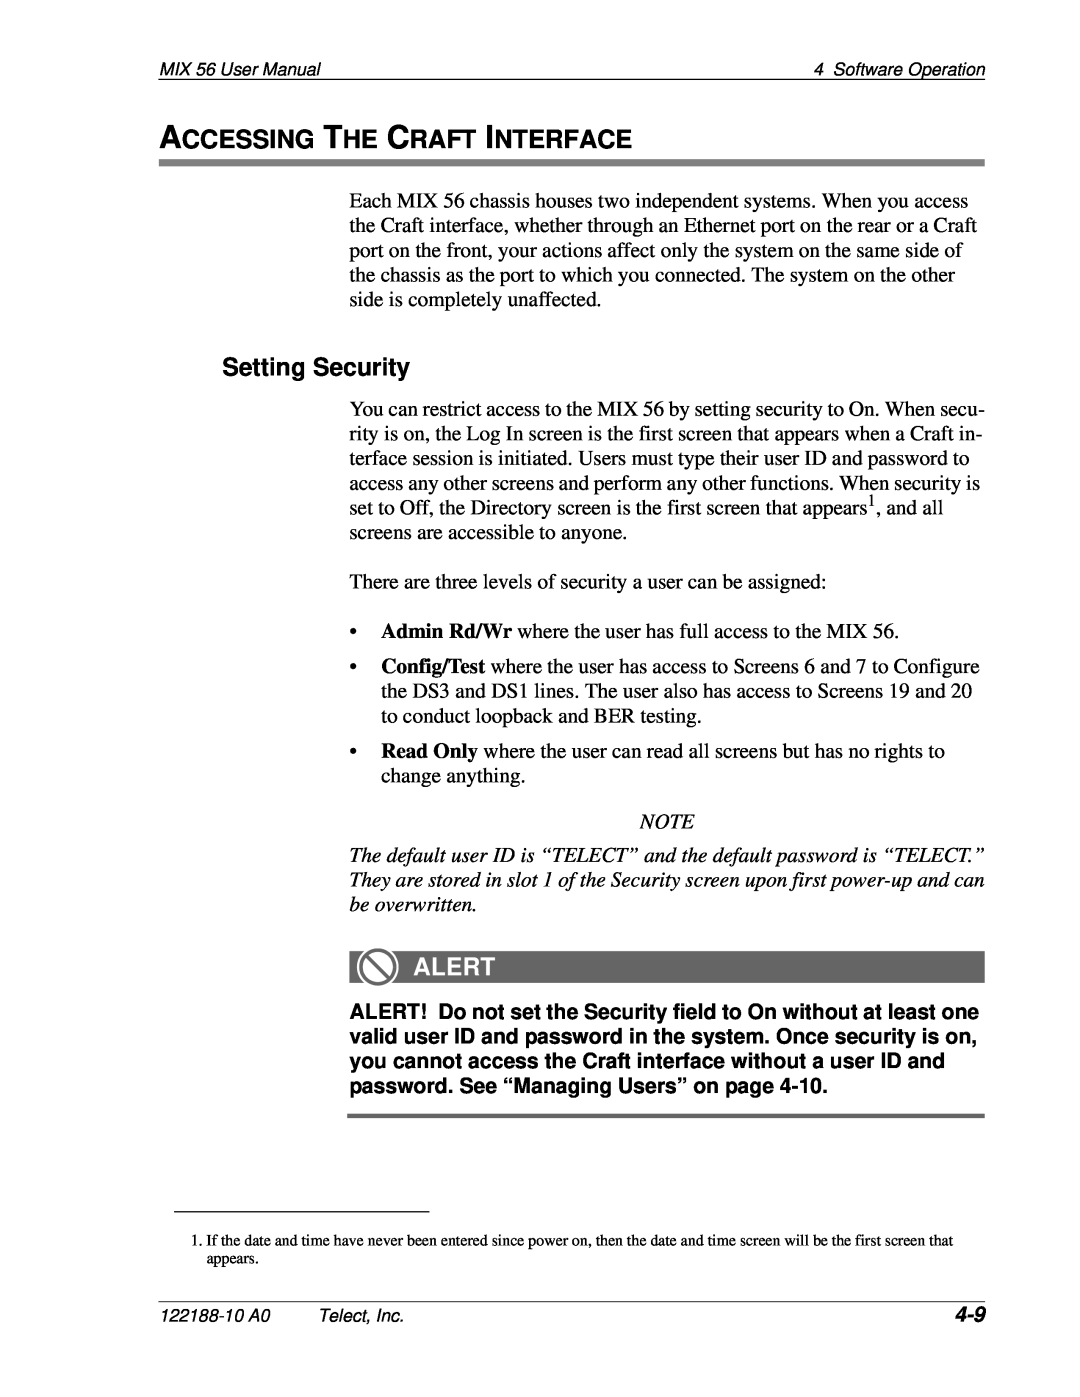 Telect MIX 56 user manual Accessing The Craft Interface, Setting Security, Alert 